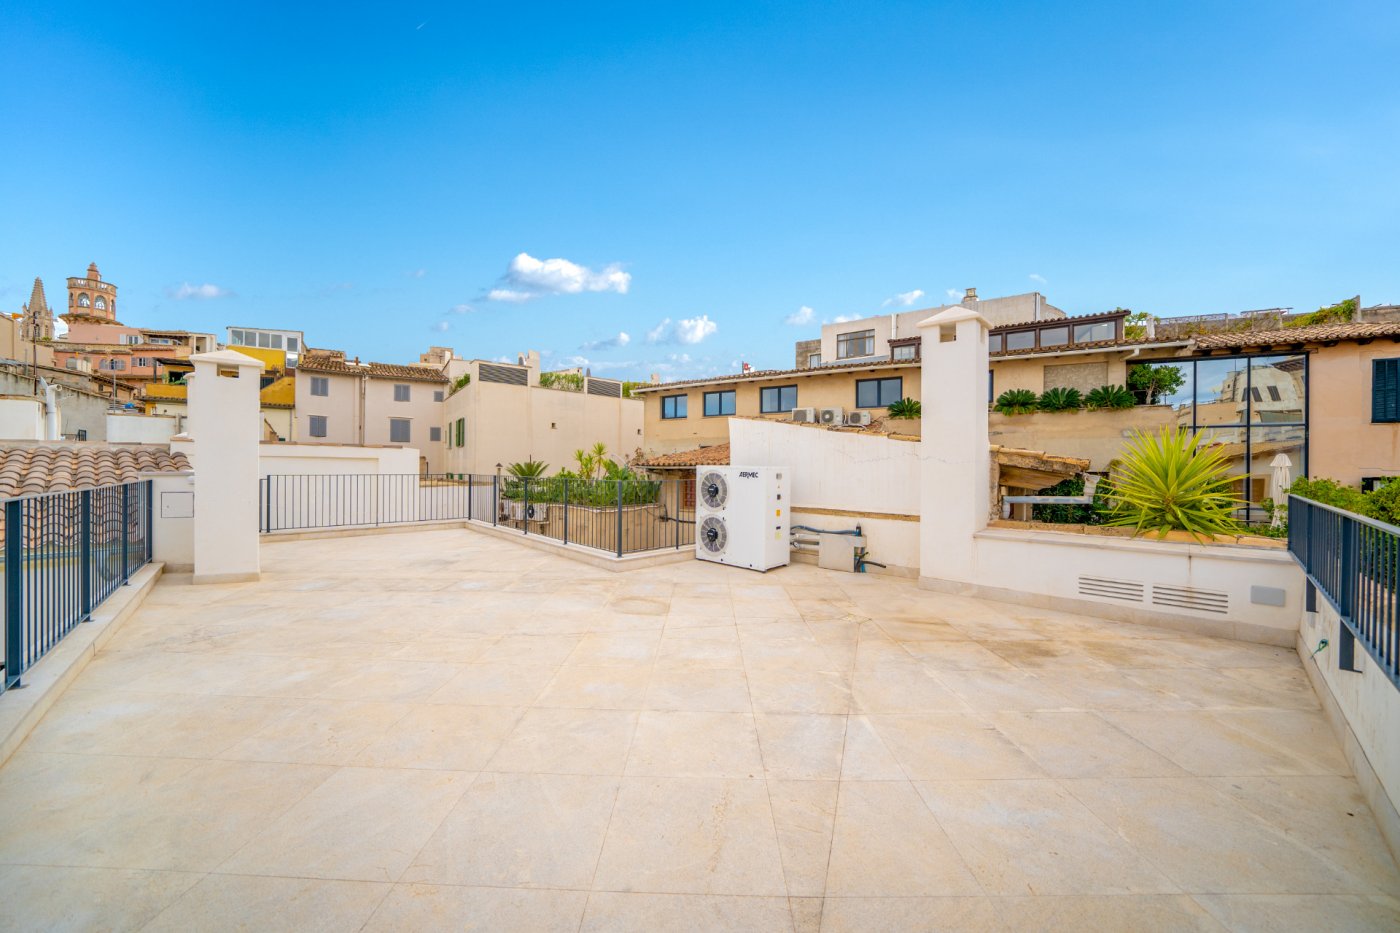 Spectacular penthouse with elegant design and community pool in the historic centre of Palma